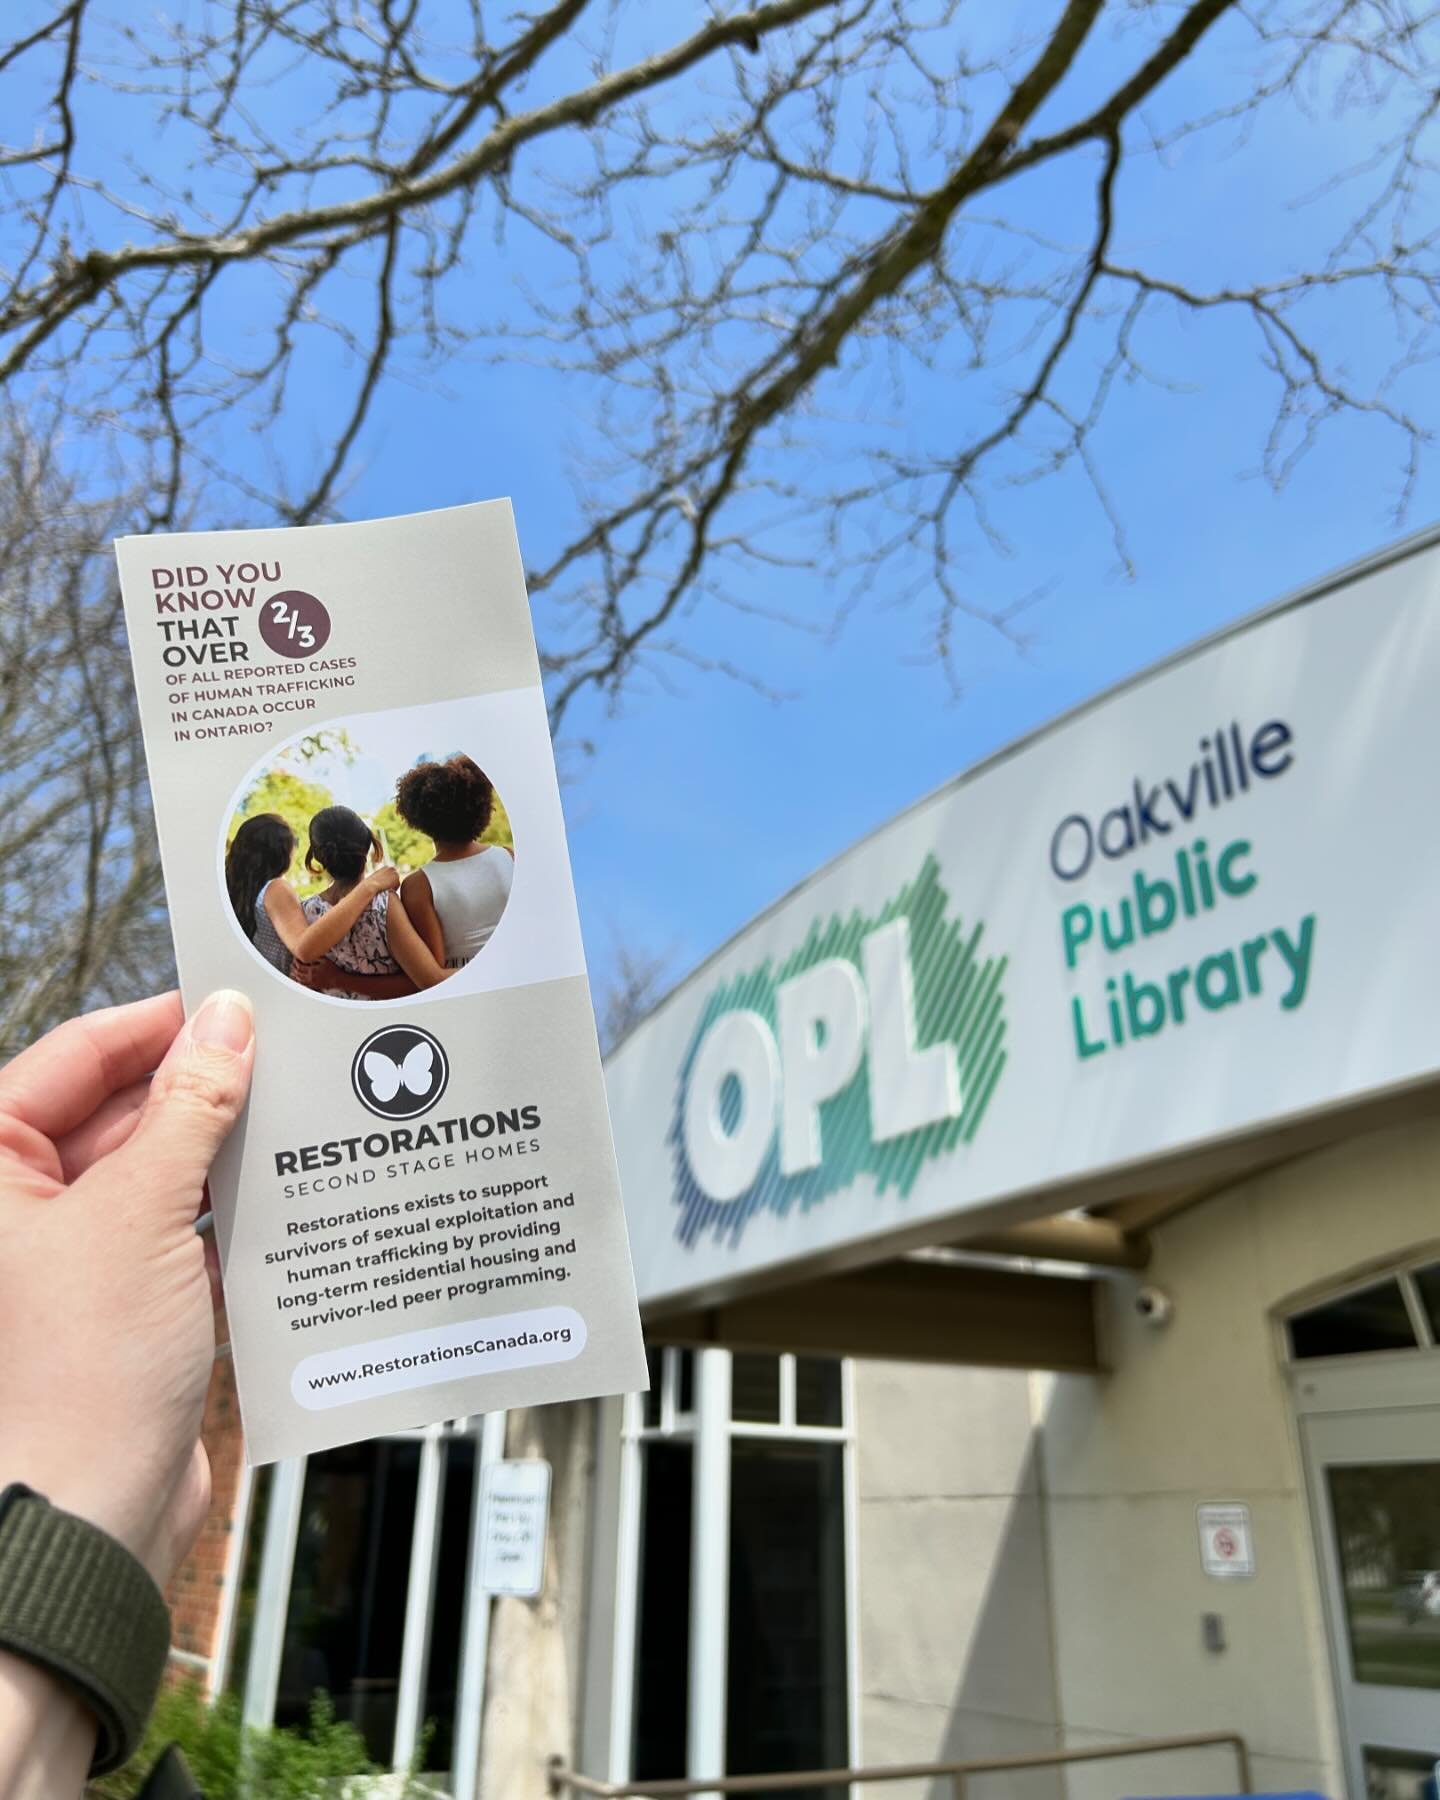 Coming soon to @oakvillelibrary!&nbsp;

Oakville Public Library has requested Restorations brochures to place in their branches. We were happy to provide - to raise awareness of #humantrafficking in @regionofhalton and to share about our residential 